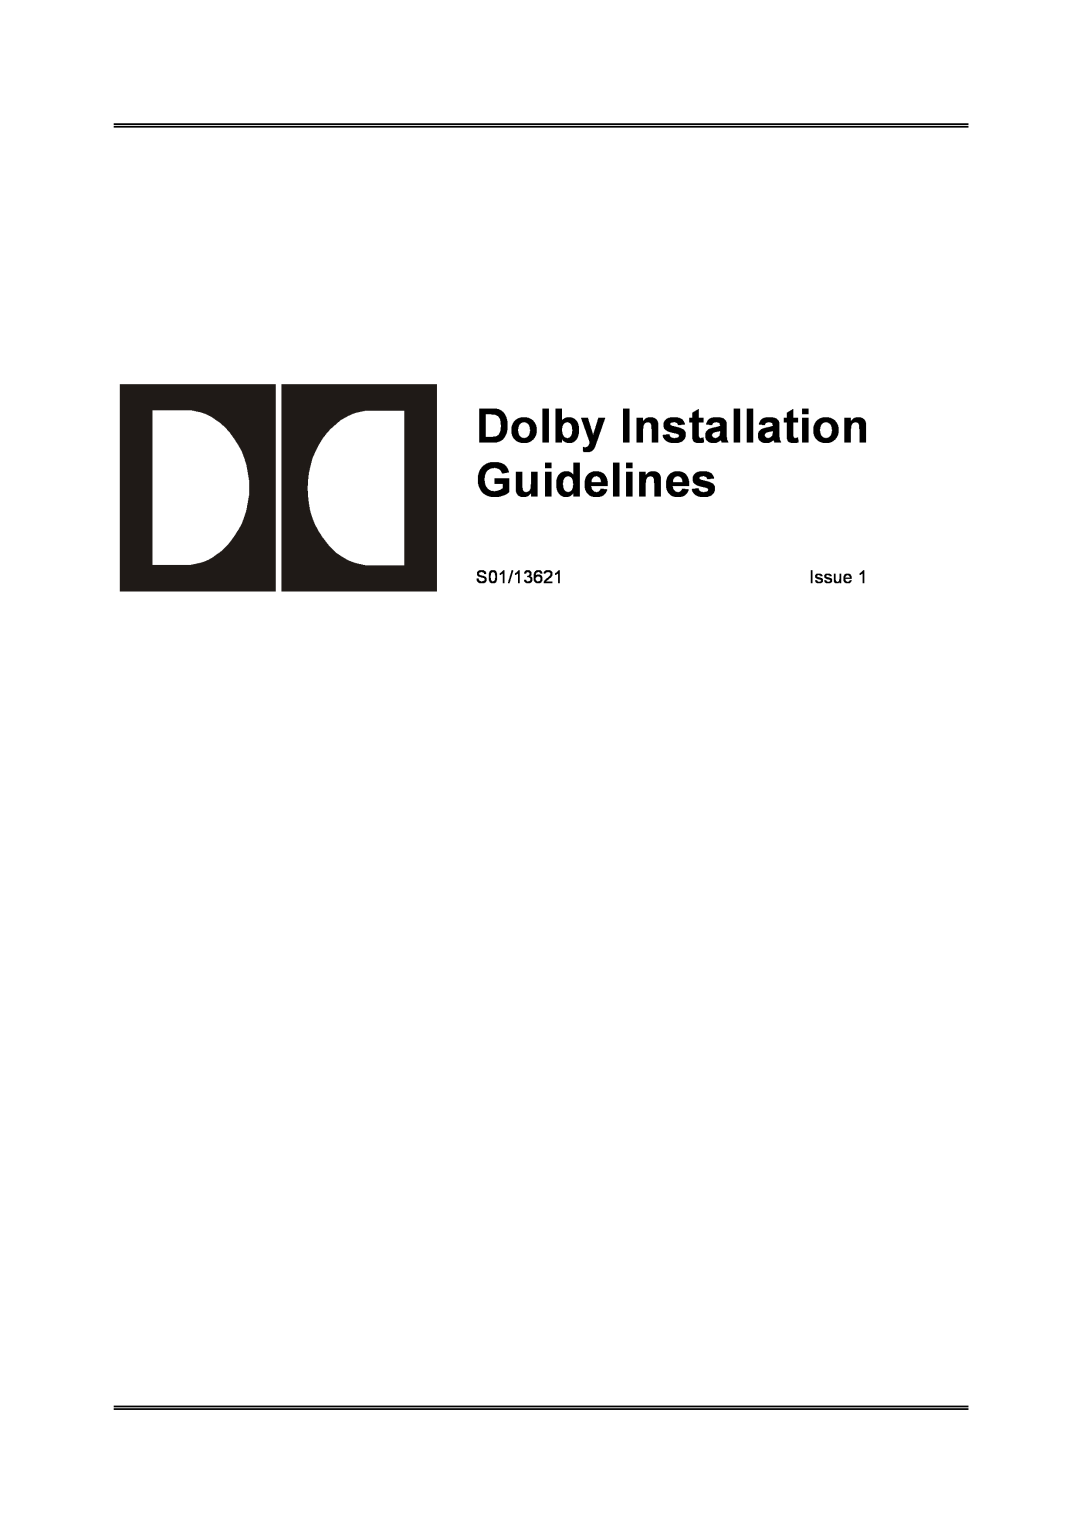 Dolby Laboratories S01/13621 manual Dolby Installation Guidelines, Issue 